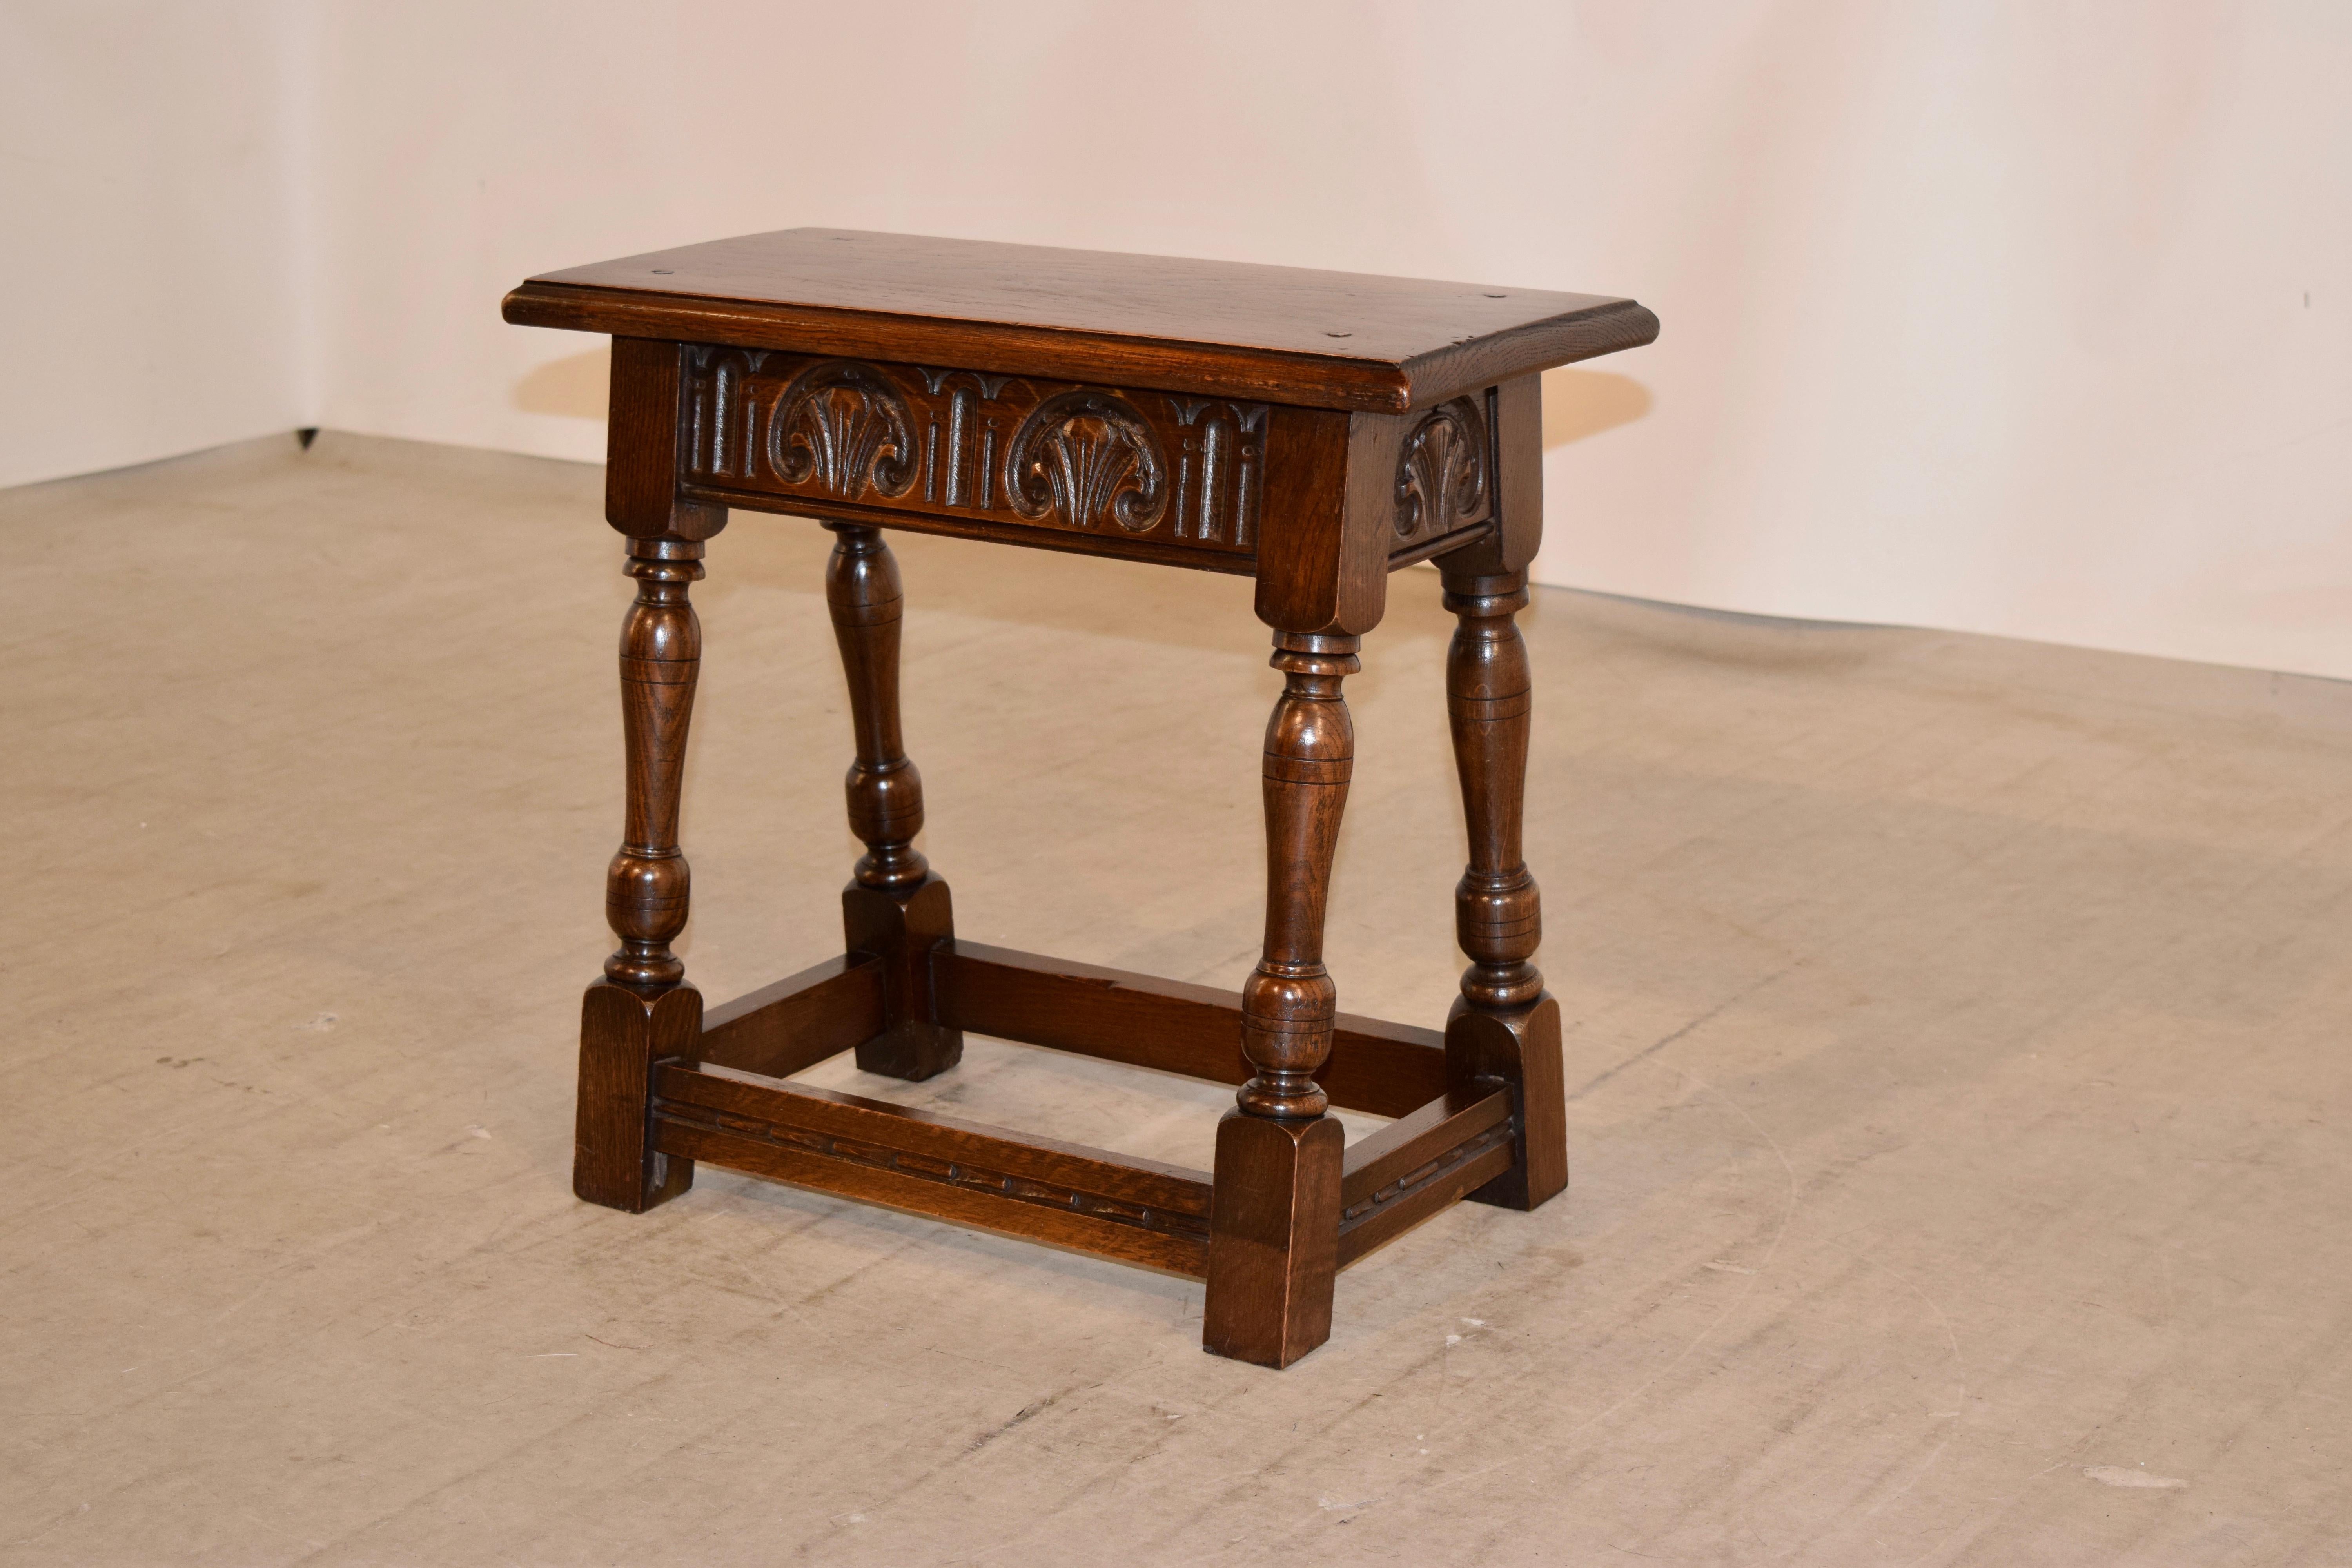 19th century English oak joint stool with pegged construction in the top and a beveled edge, following down to a hand carved apron on all four sides, for easy placement in any room and supported on hand-turned and splayed legs joined by routed and